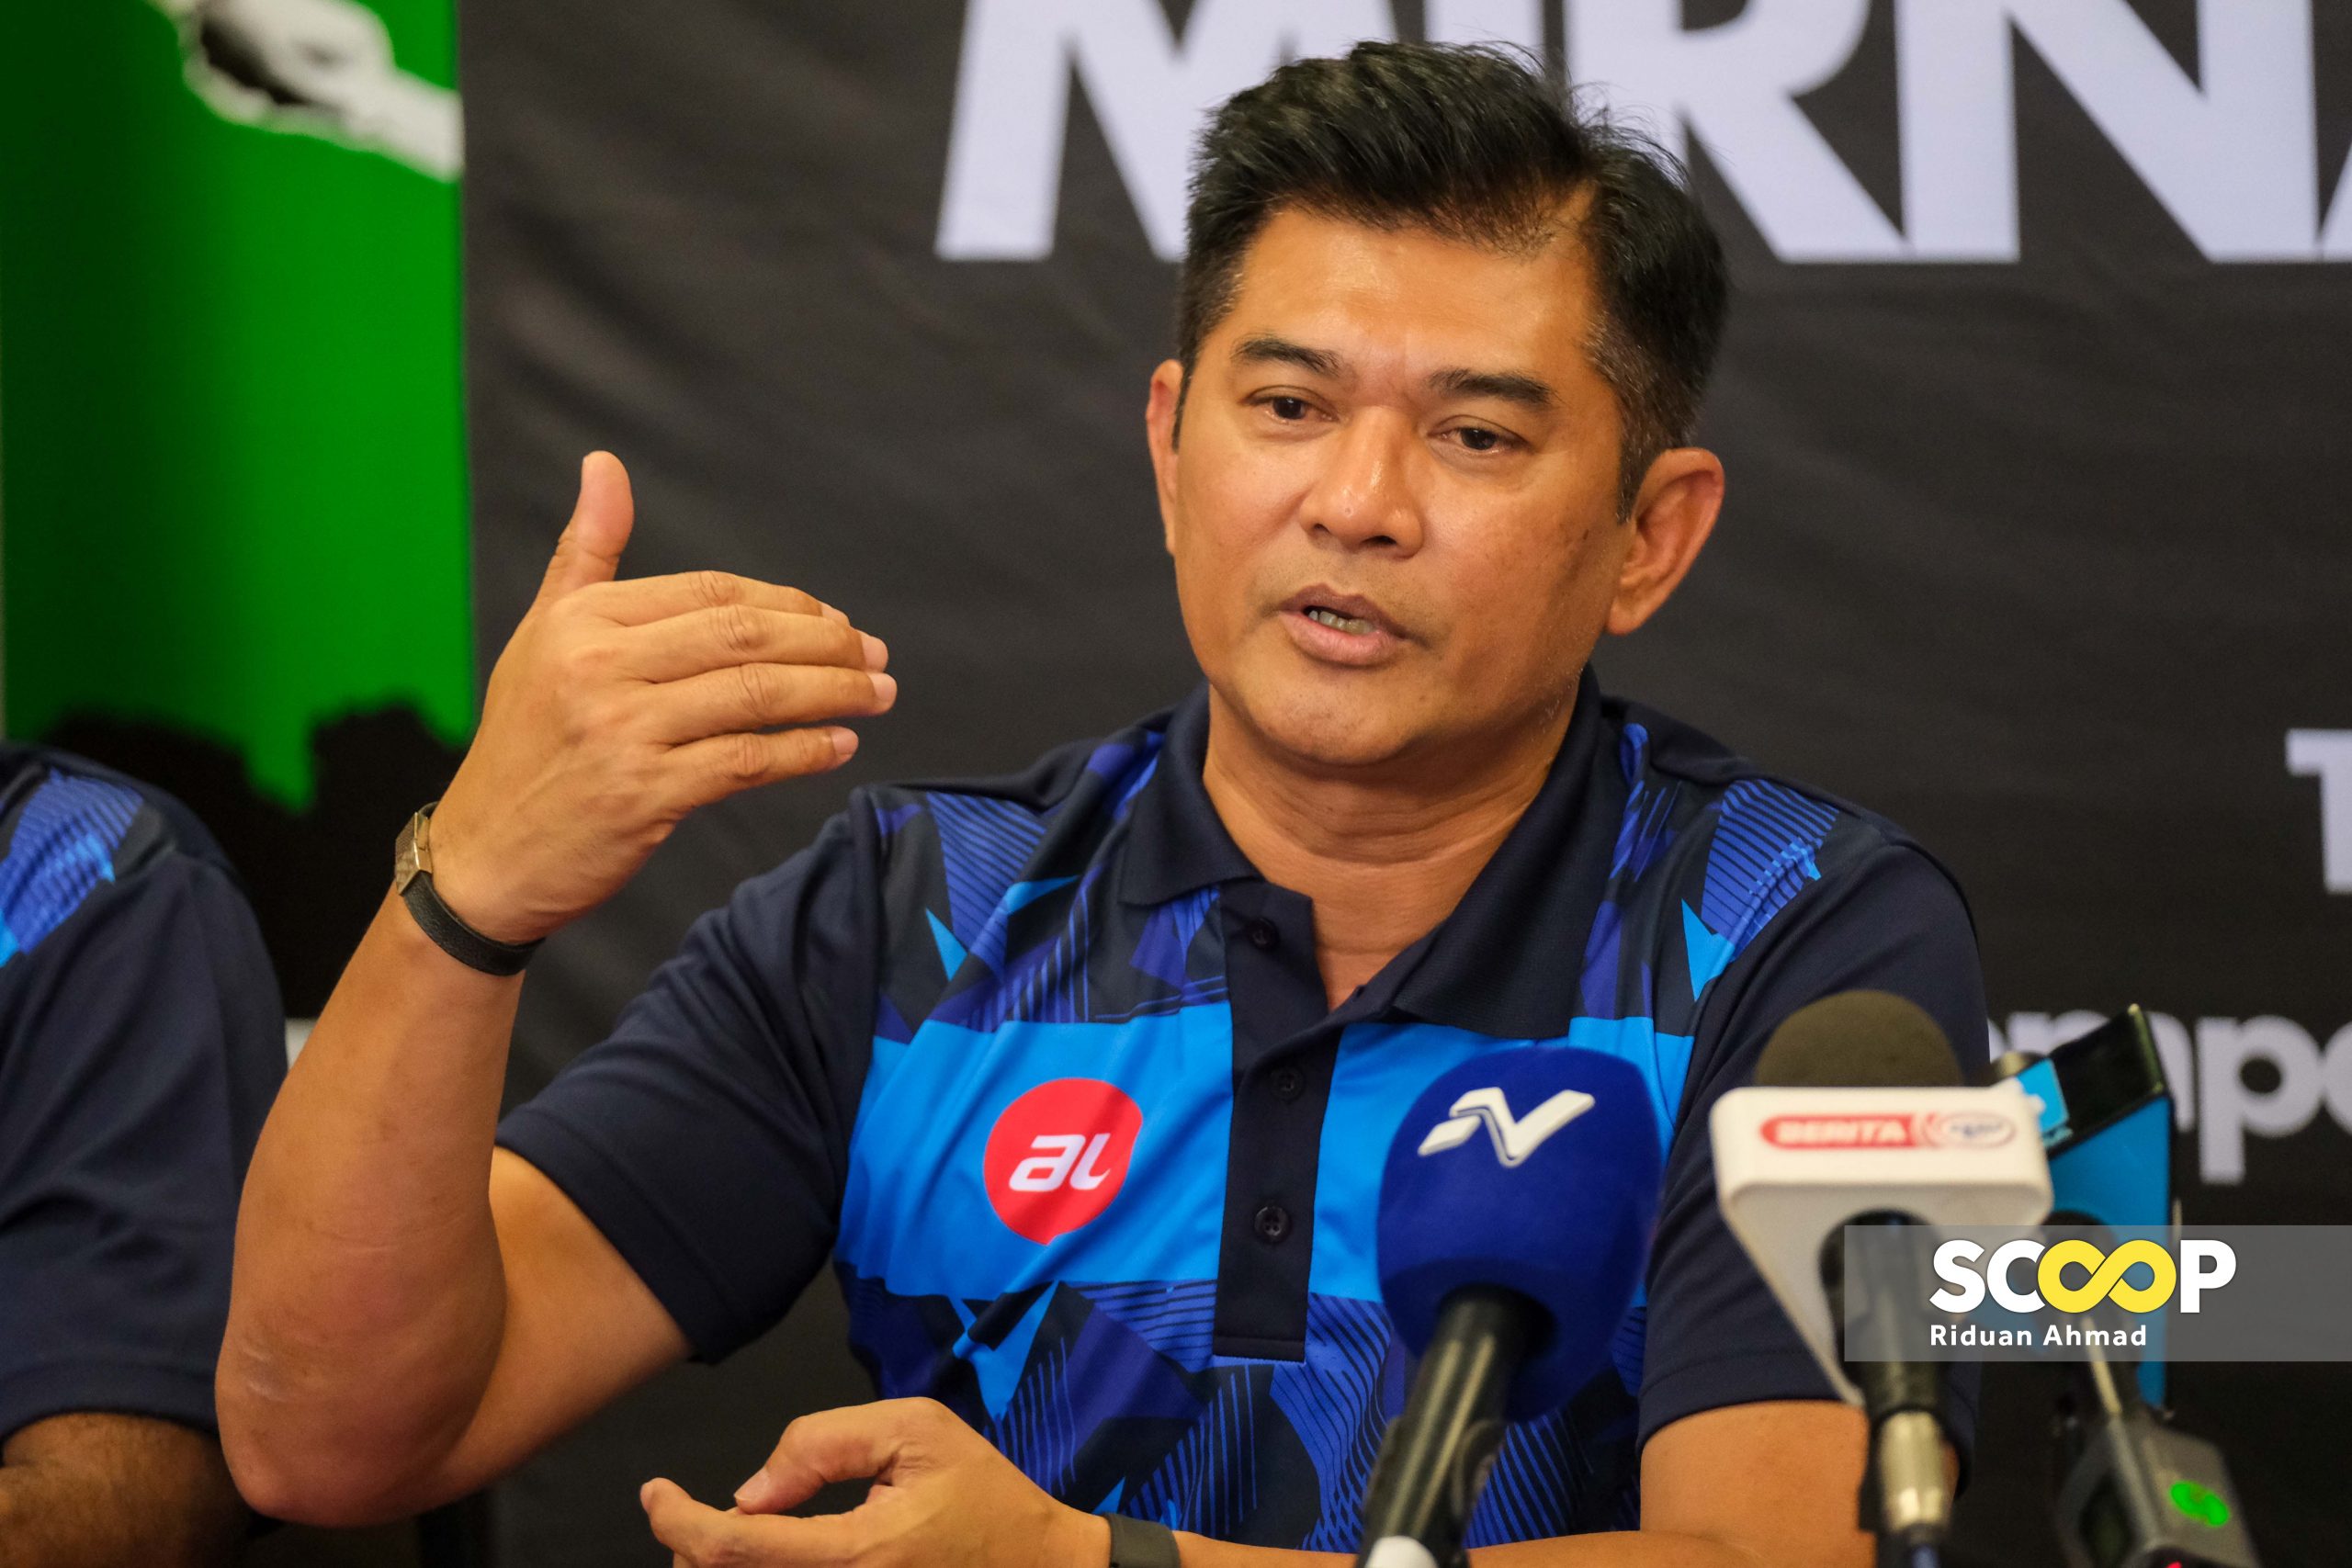 Team Malaysia needs your support: Mirnawan urges positive fan wave amid Speedy Tigers' struggles